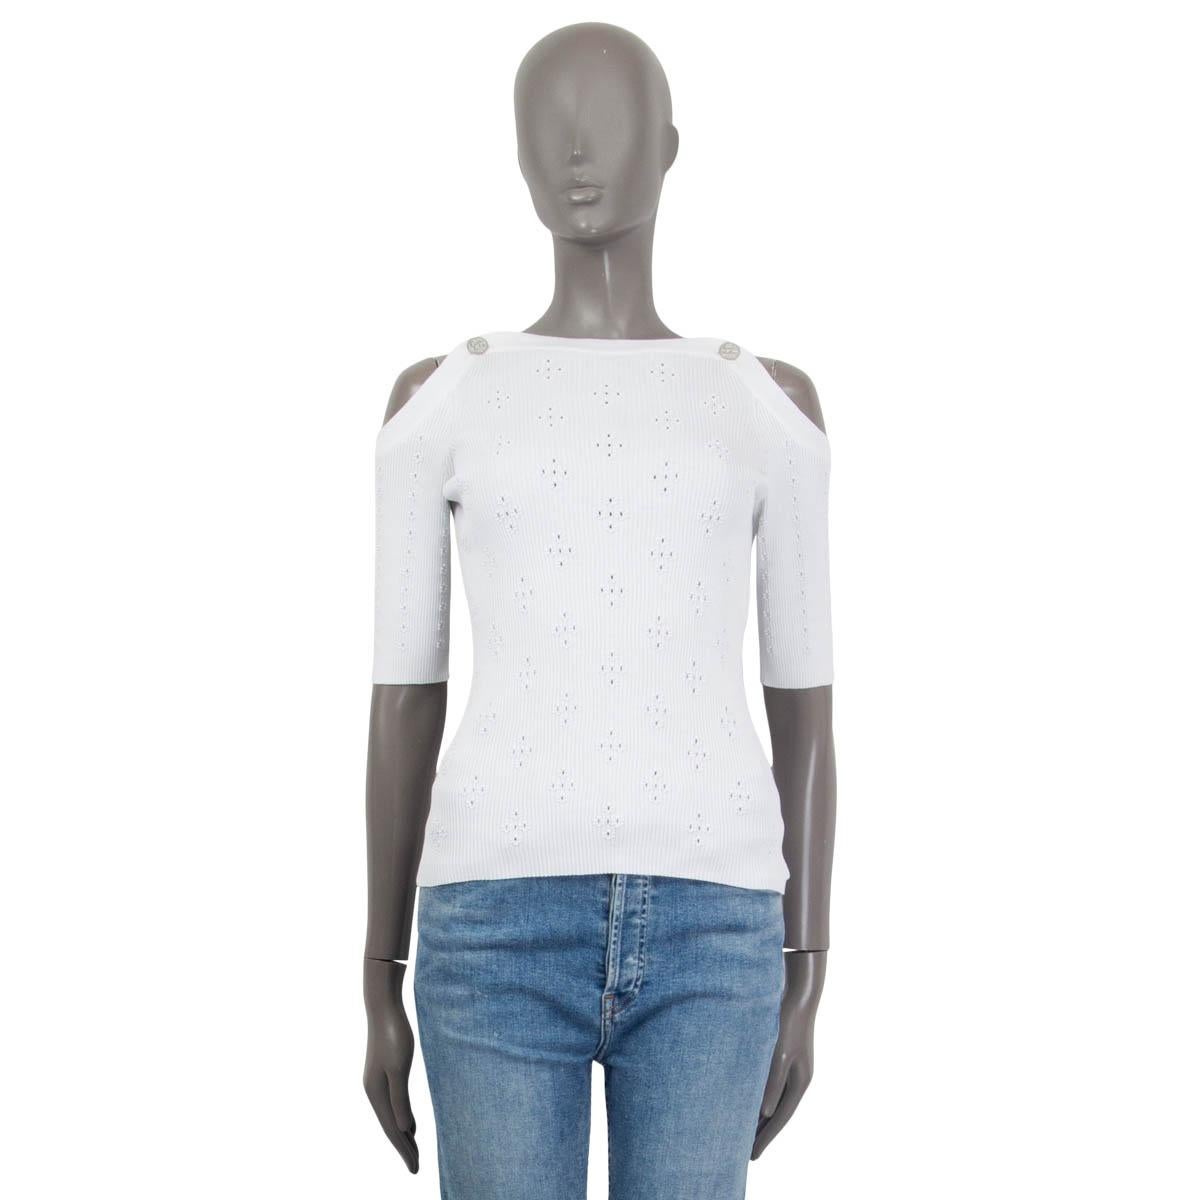 100% authentic Chanel Cruise 2017 cold shoulder rib knit top in white cotton (100%). Features faux buttons on the shoulders and short sleeves. Unlined. Has been worn once and is in virtually new condition.

Measurements

Tag Size	38
Size	S
Bust	64cm